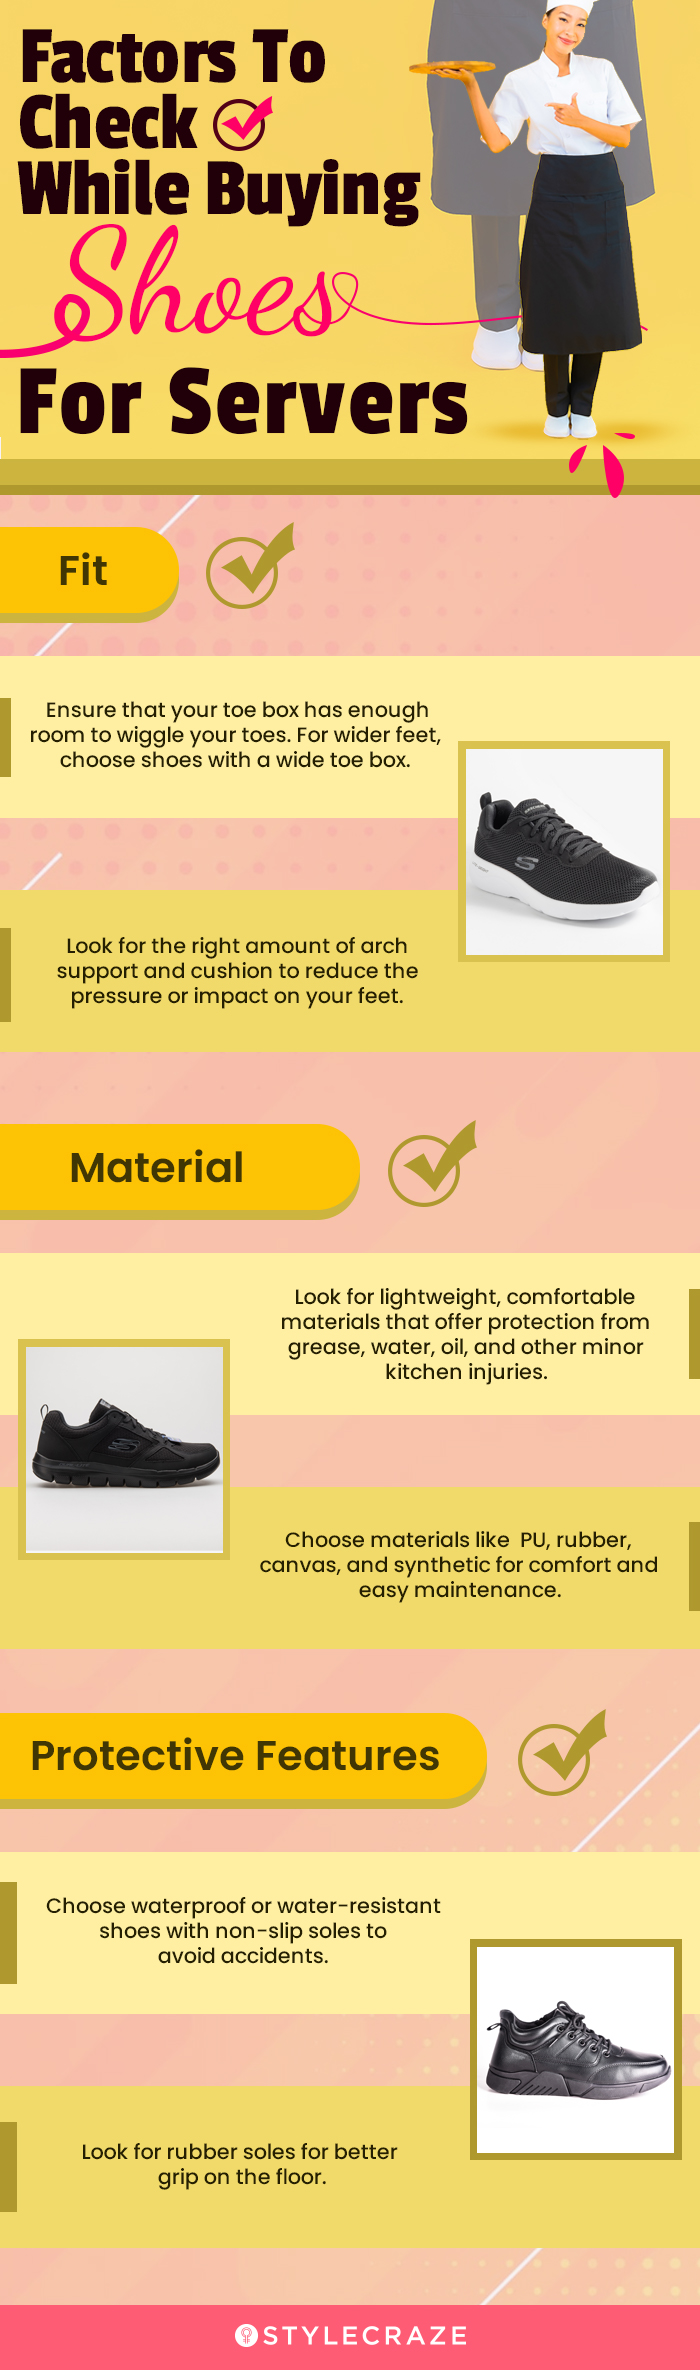 Factors To Check While Buying Shoes For Servers (infographic)